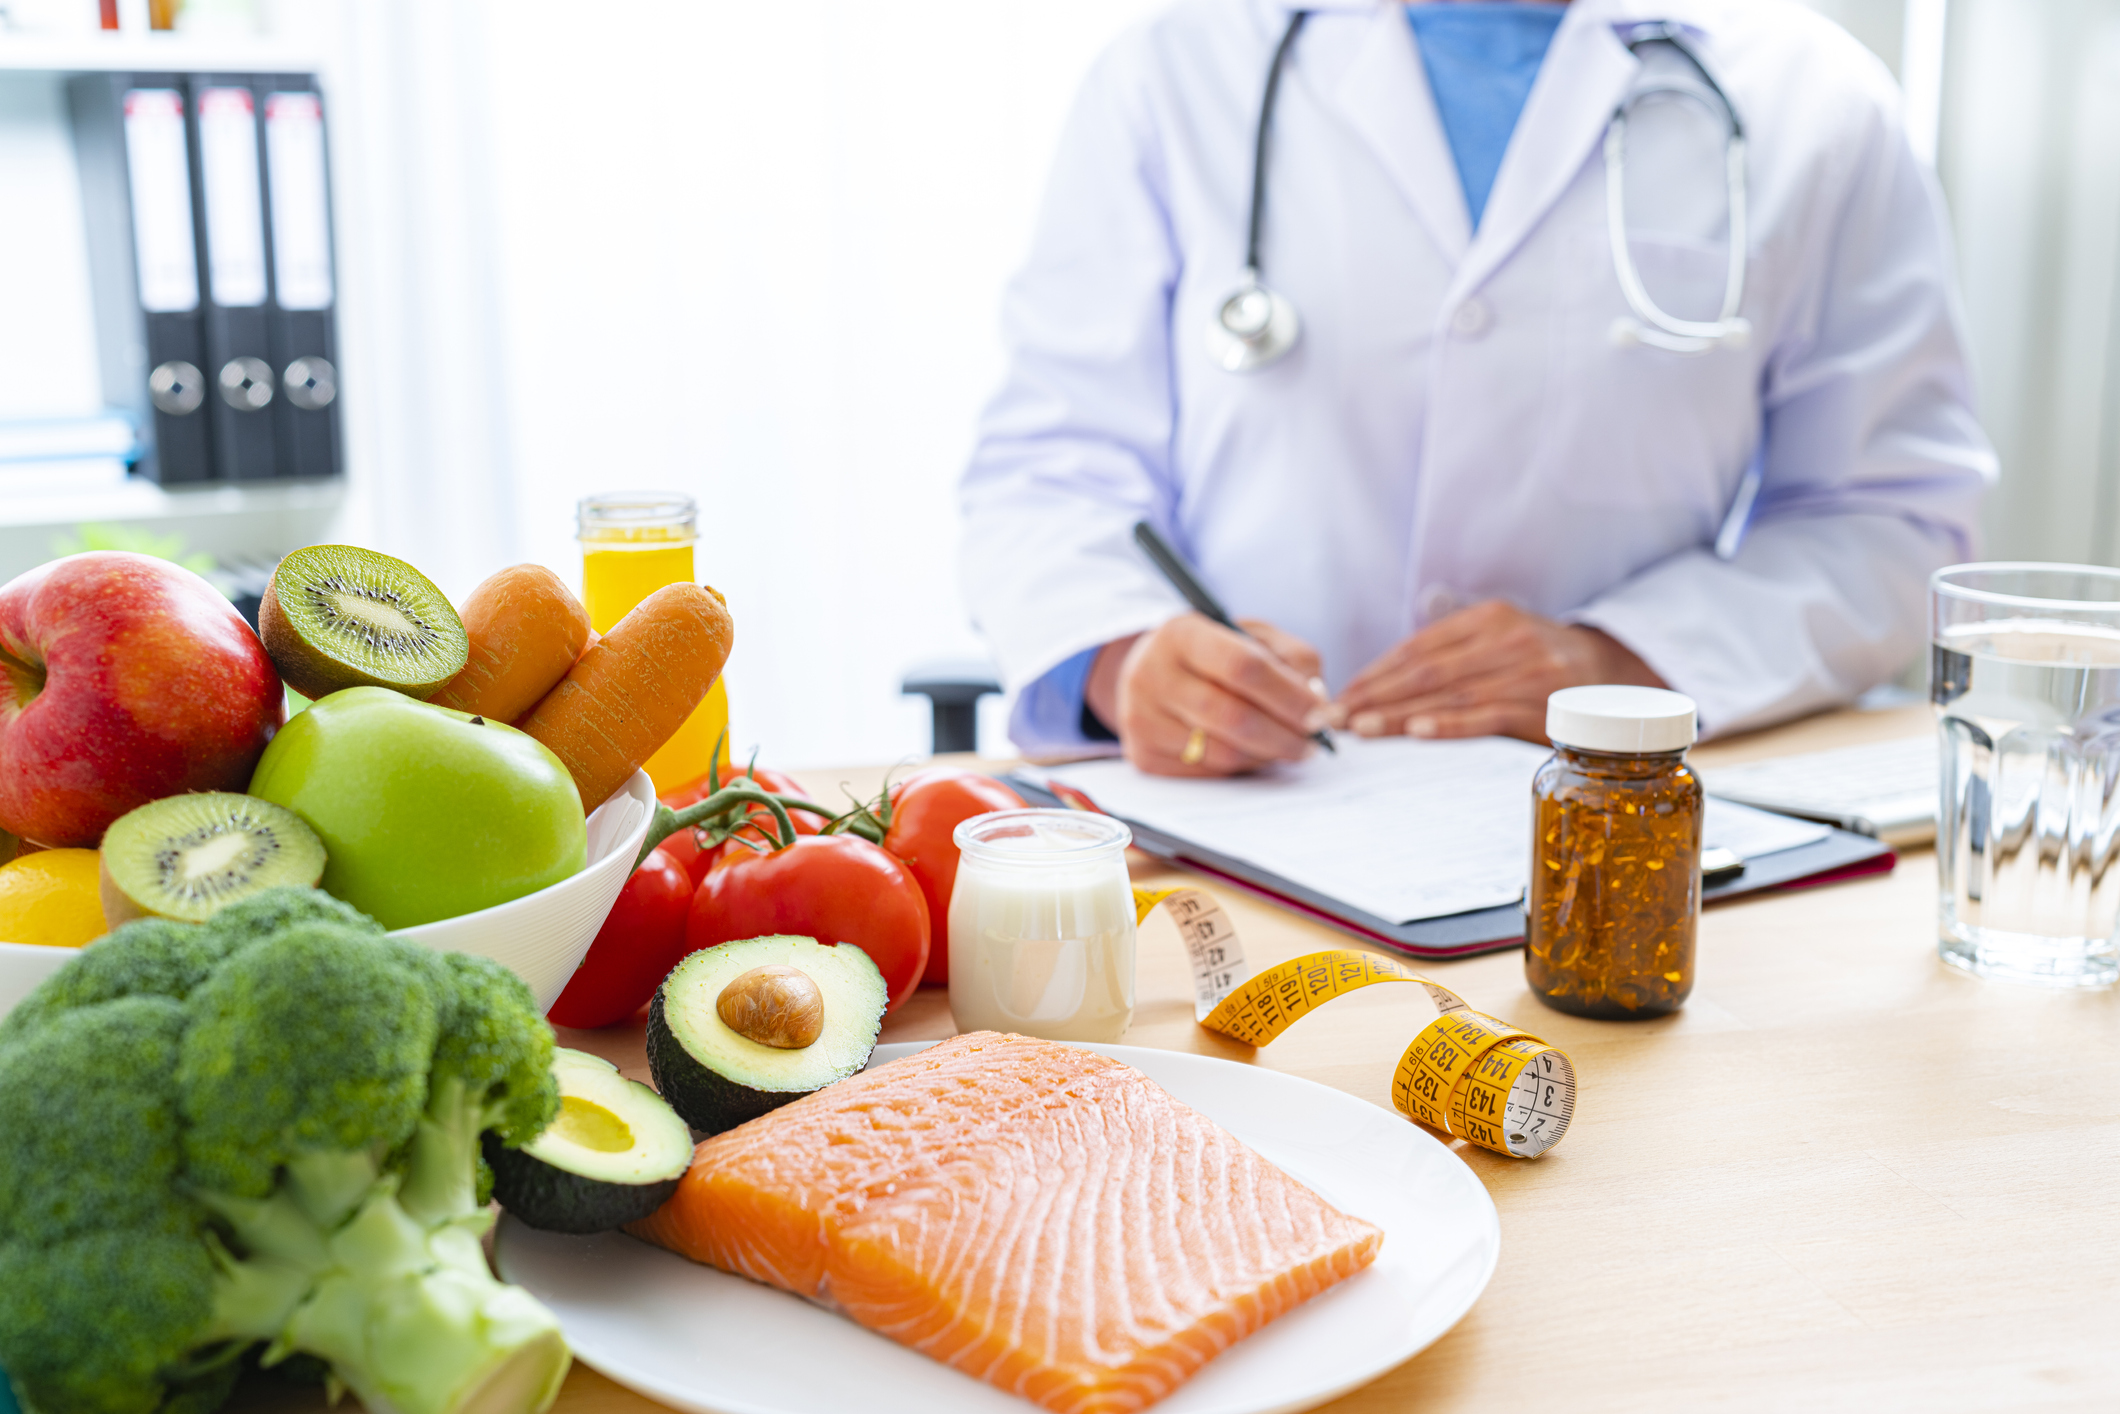 Top 3 Questions to Ask Your Dietician During the First Visit